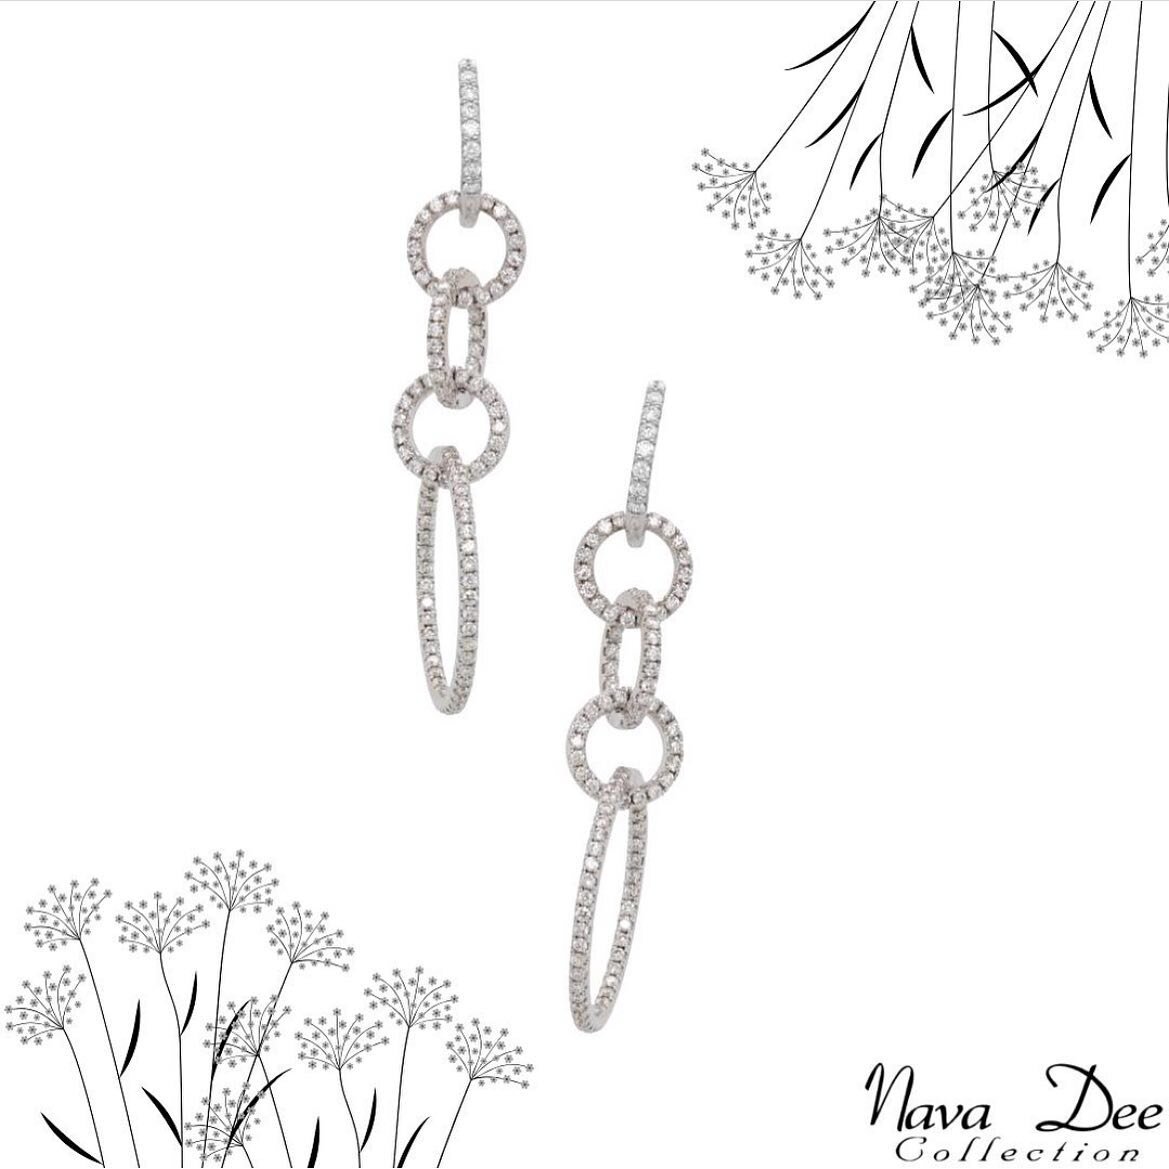 🖤G L A M🖤

✨Discover The Gold Collection at Nava Dee.

✨14k White Gold Interlocking Hoops With Diamonds.

📖Check out our full look book! DM for more info.

#jewelry #shopsmall #accessories #gold #earrings #trendy #handmadejewelry #necklace #lakewo